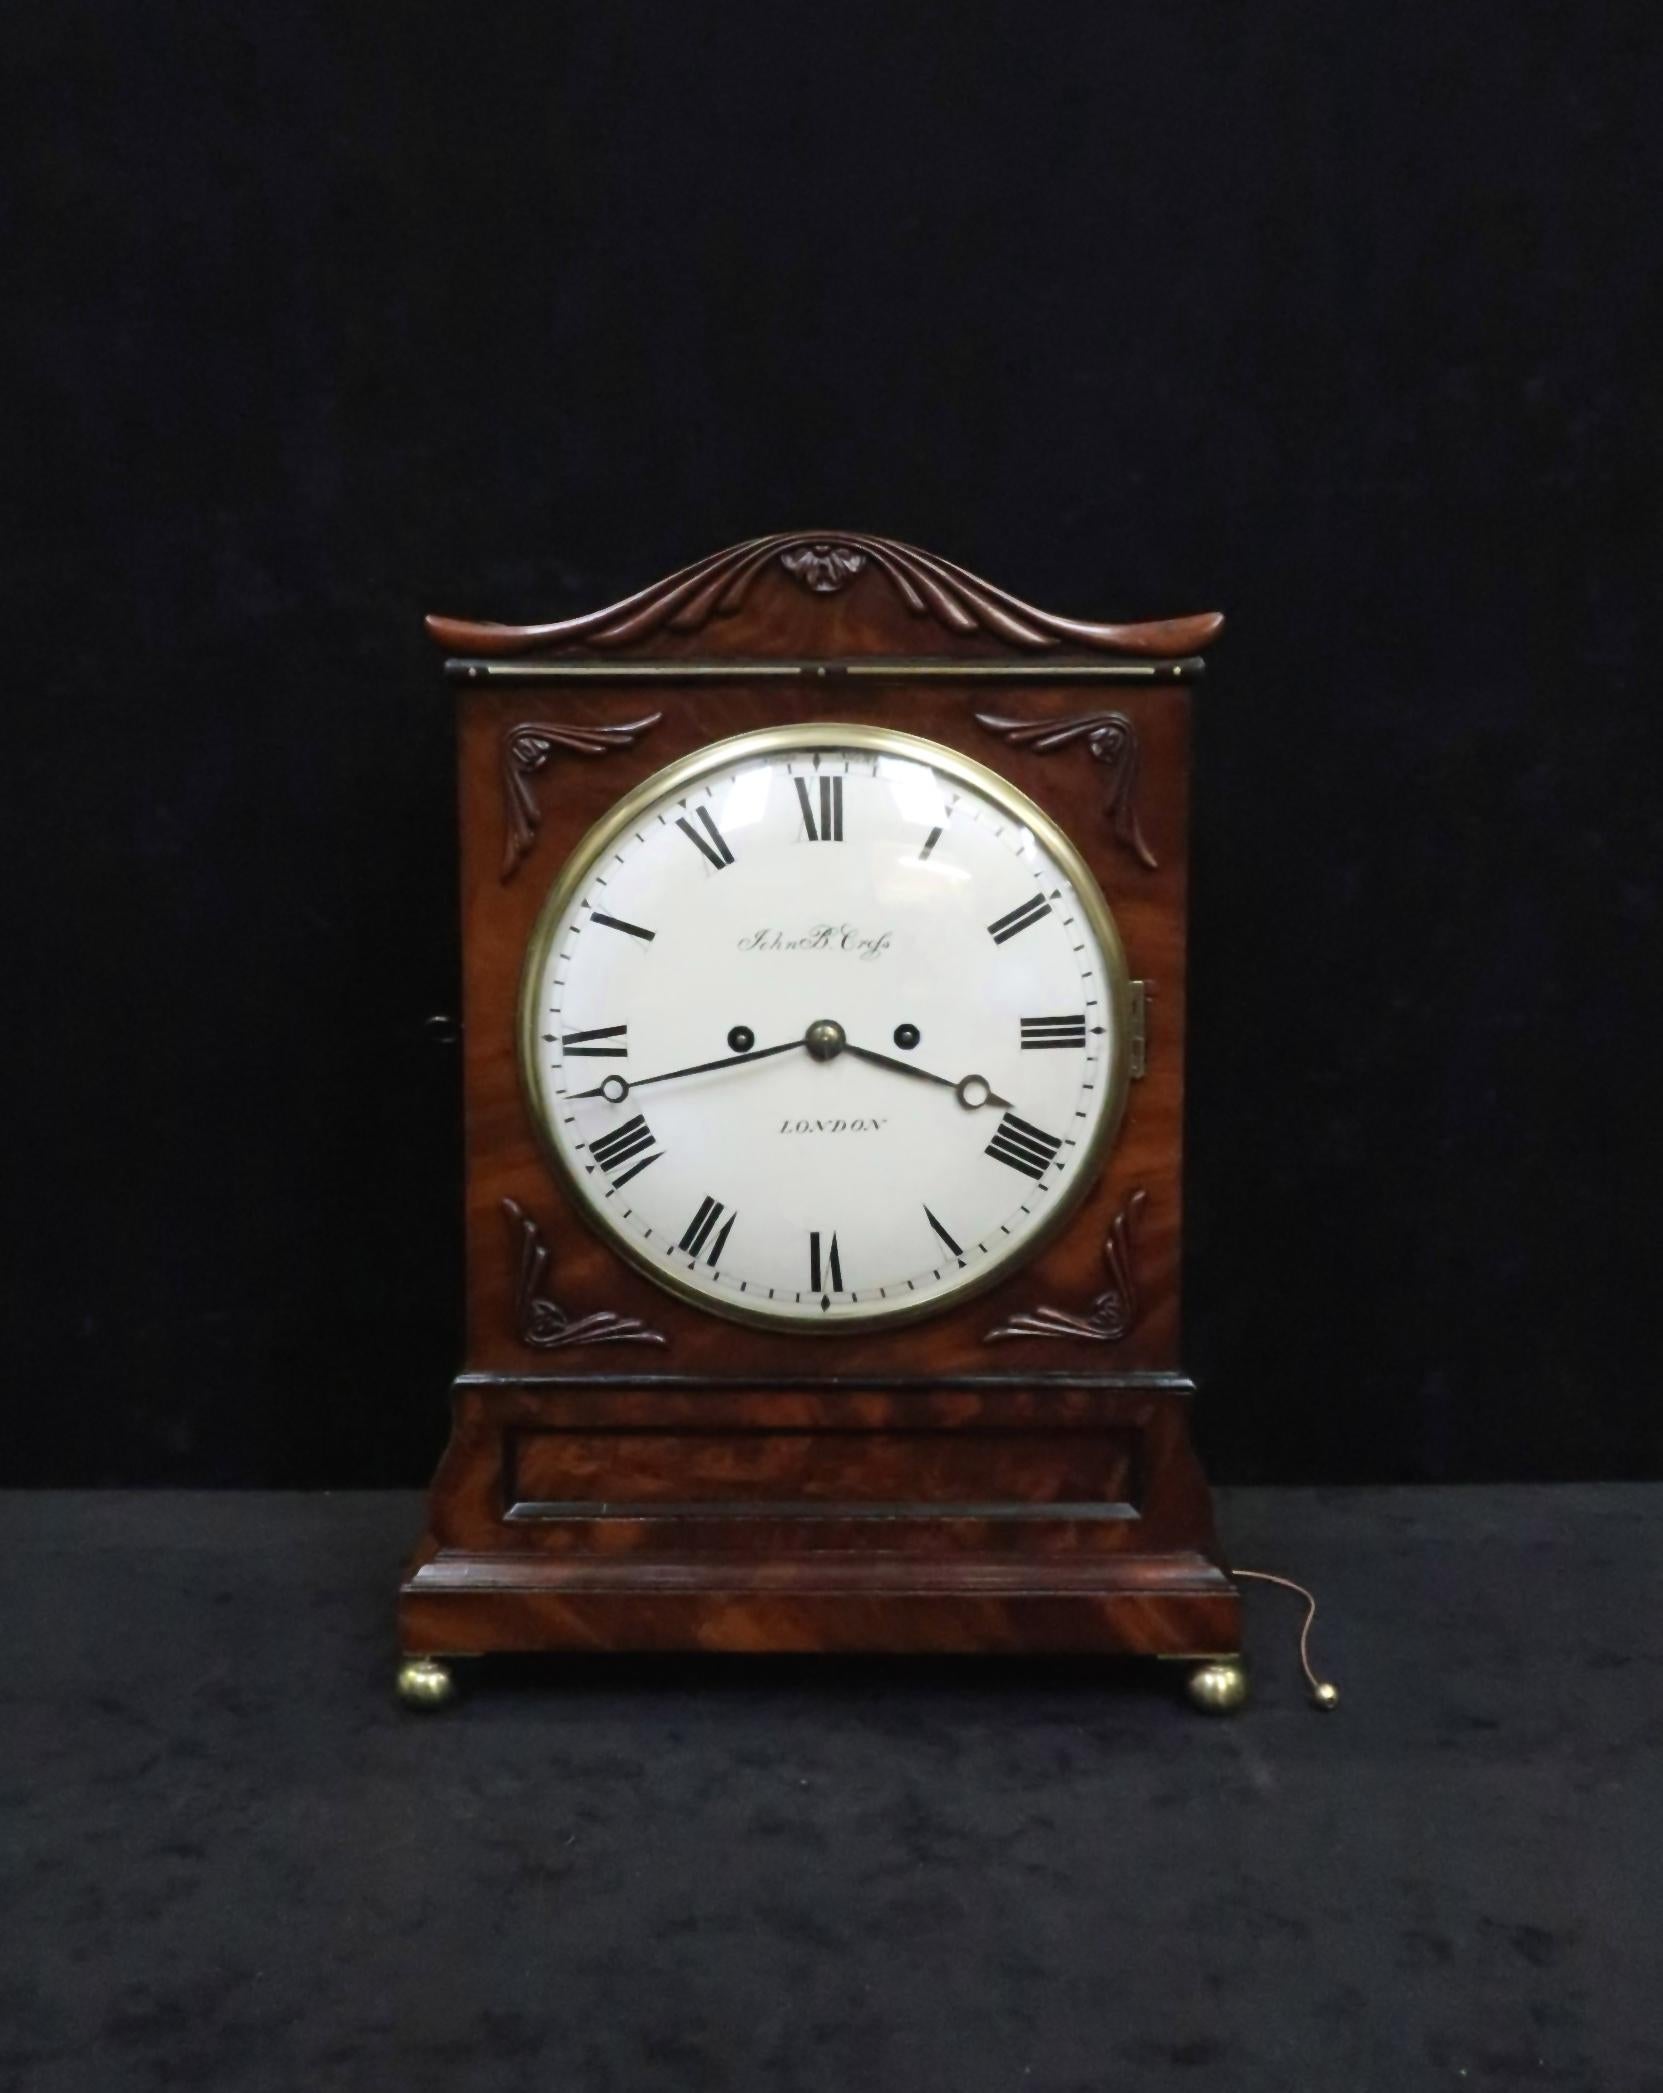 A excellent quality English William IV figured mahogany bracket clock with applied honeysuckle carving, shaped top, ebonized moulds, Gothic style brass sound frets to the side stood on brass ball feet.

The clock has an eight inch painted dish